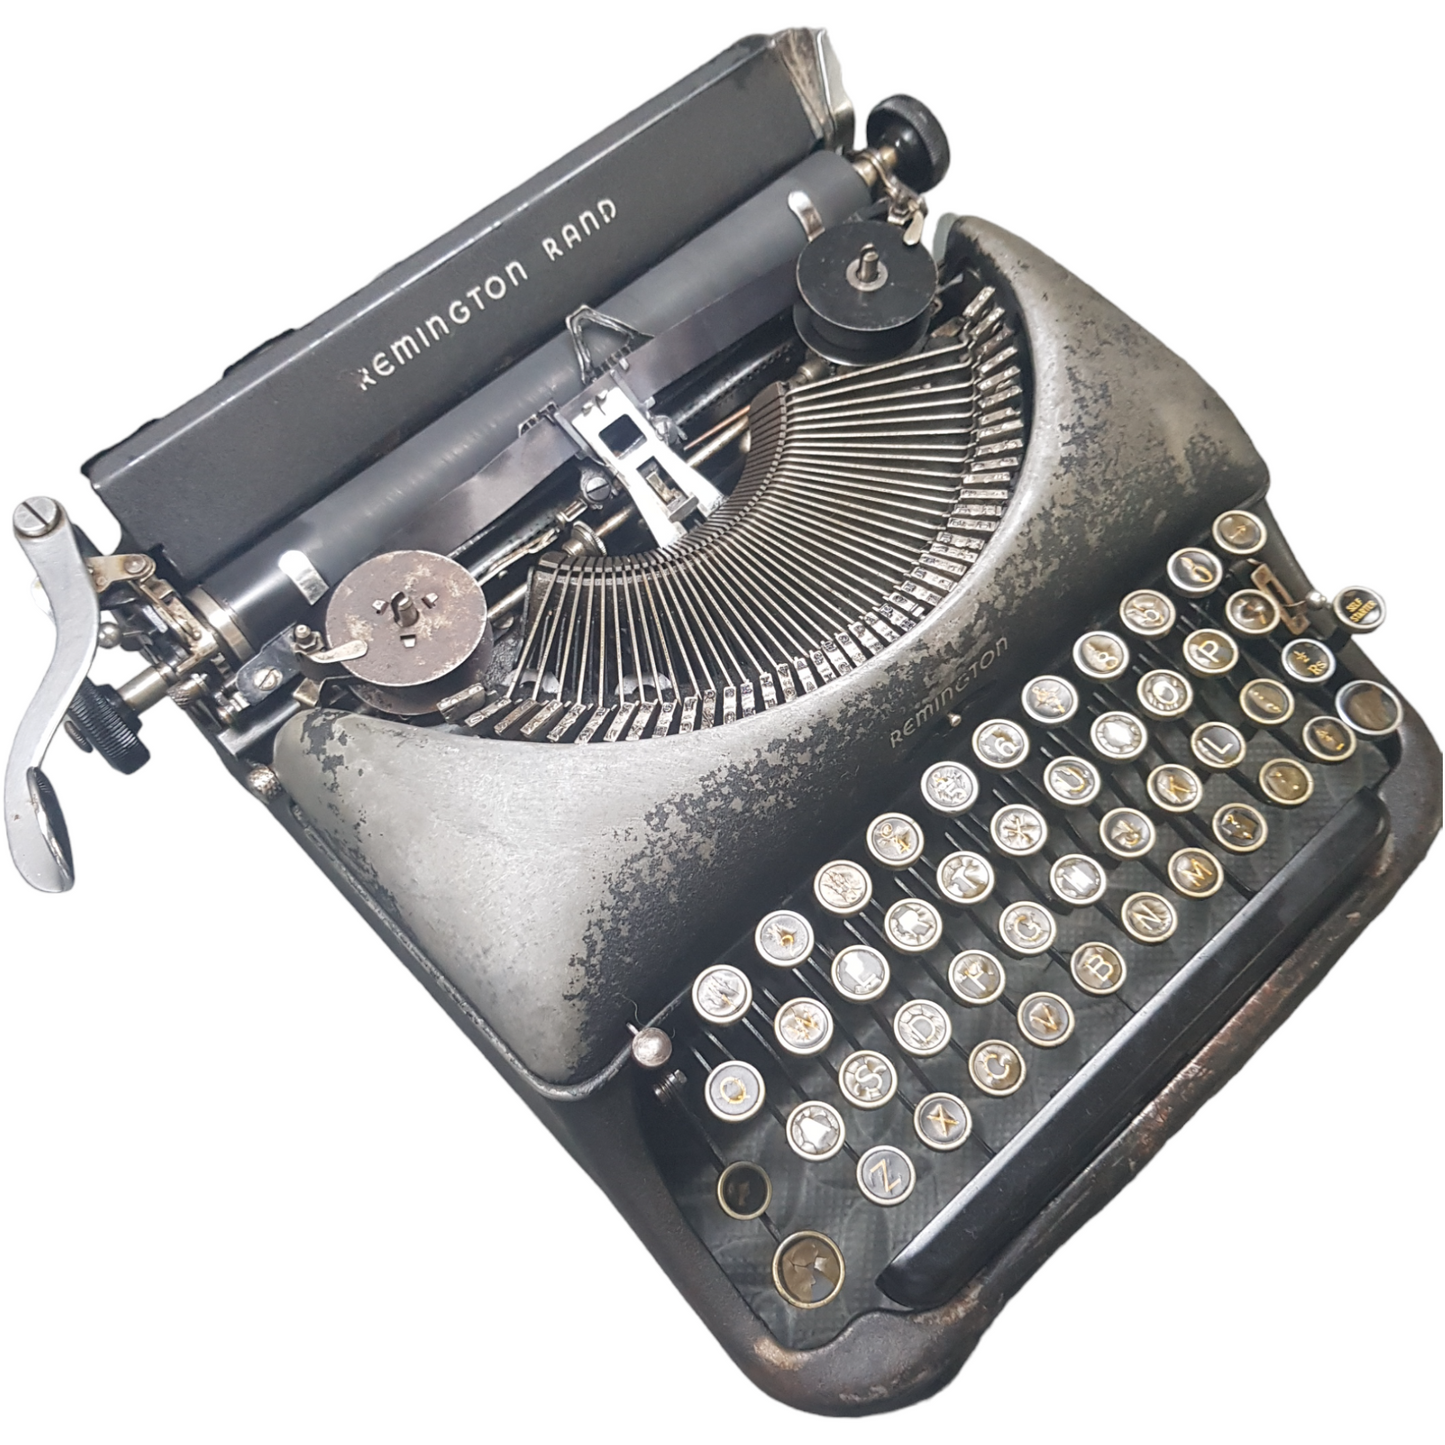 Image of Remington 5 Model Typewriter. A mid Size Portable Typewriter. Made in the USA. Available from Universal Typewriter Company.